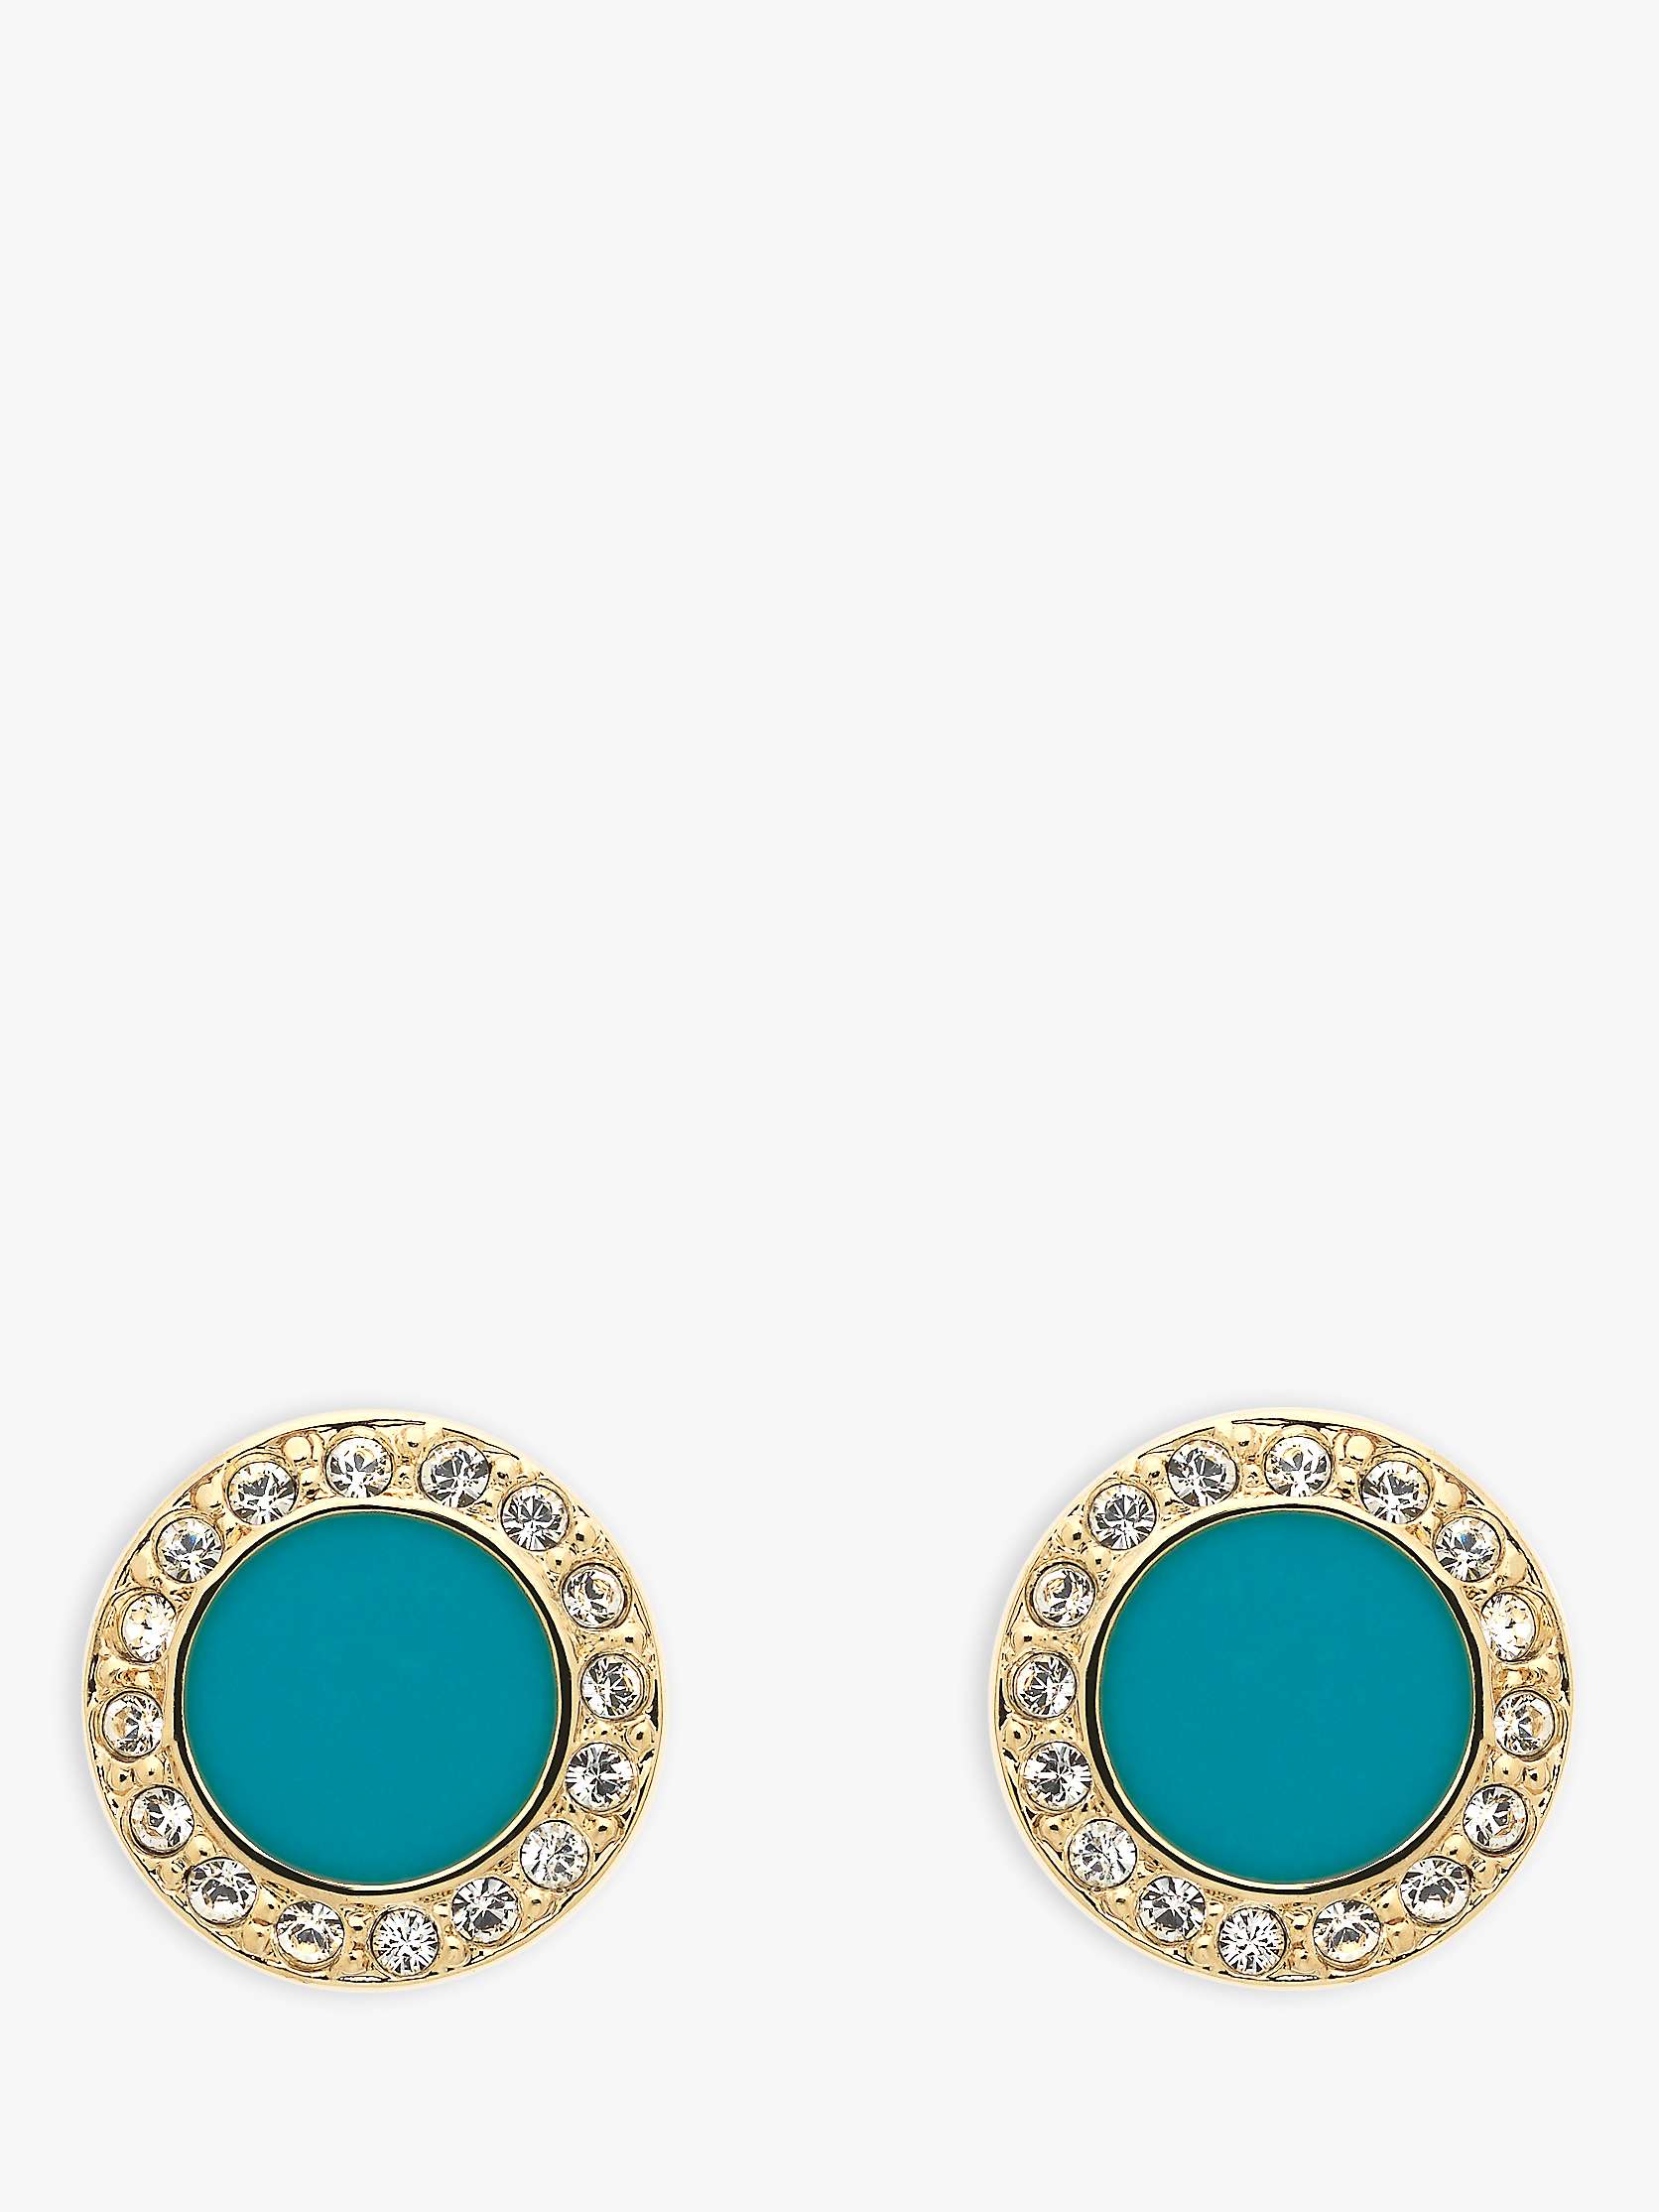 Buy Melissa Odabash Glass Crystal and Enamel Round Stud Earrings, Gold/Turquoise Online at johnlewis.com